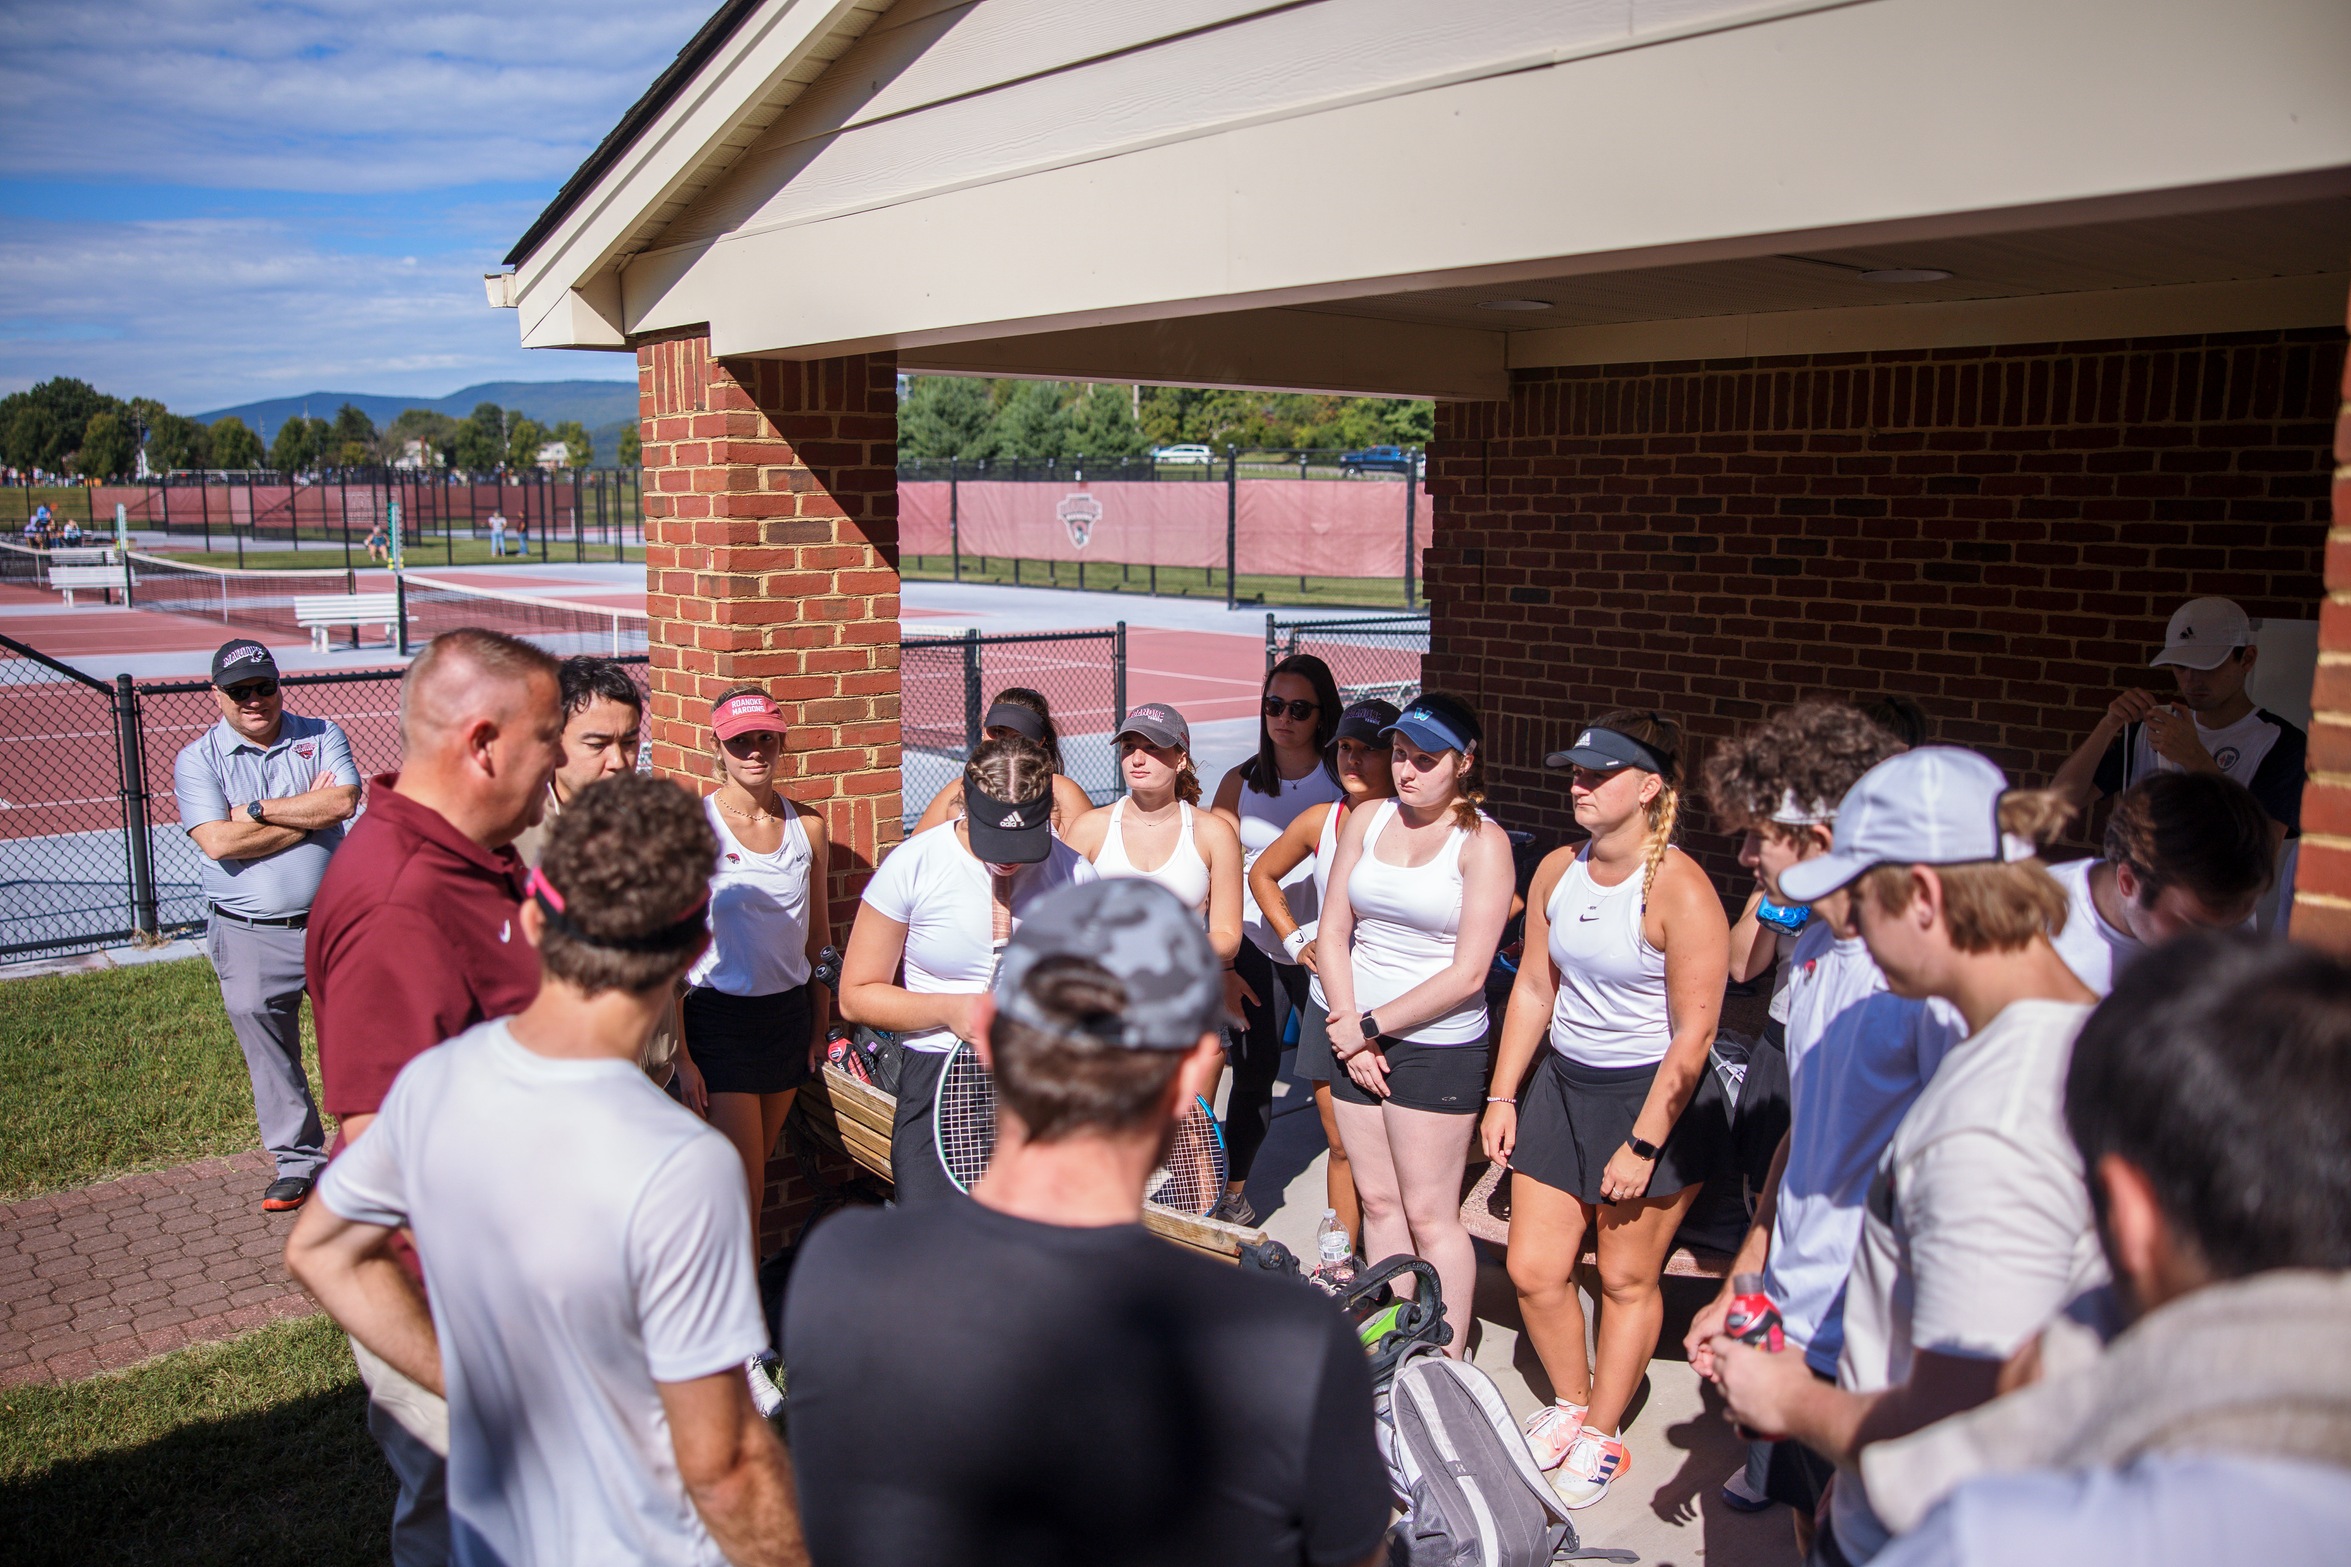 Vixens Down Maroons in ODAC Tennis Match